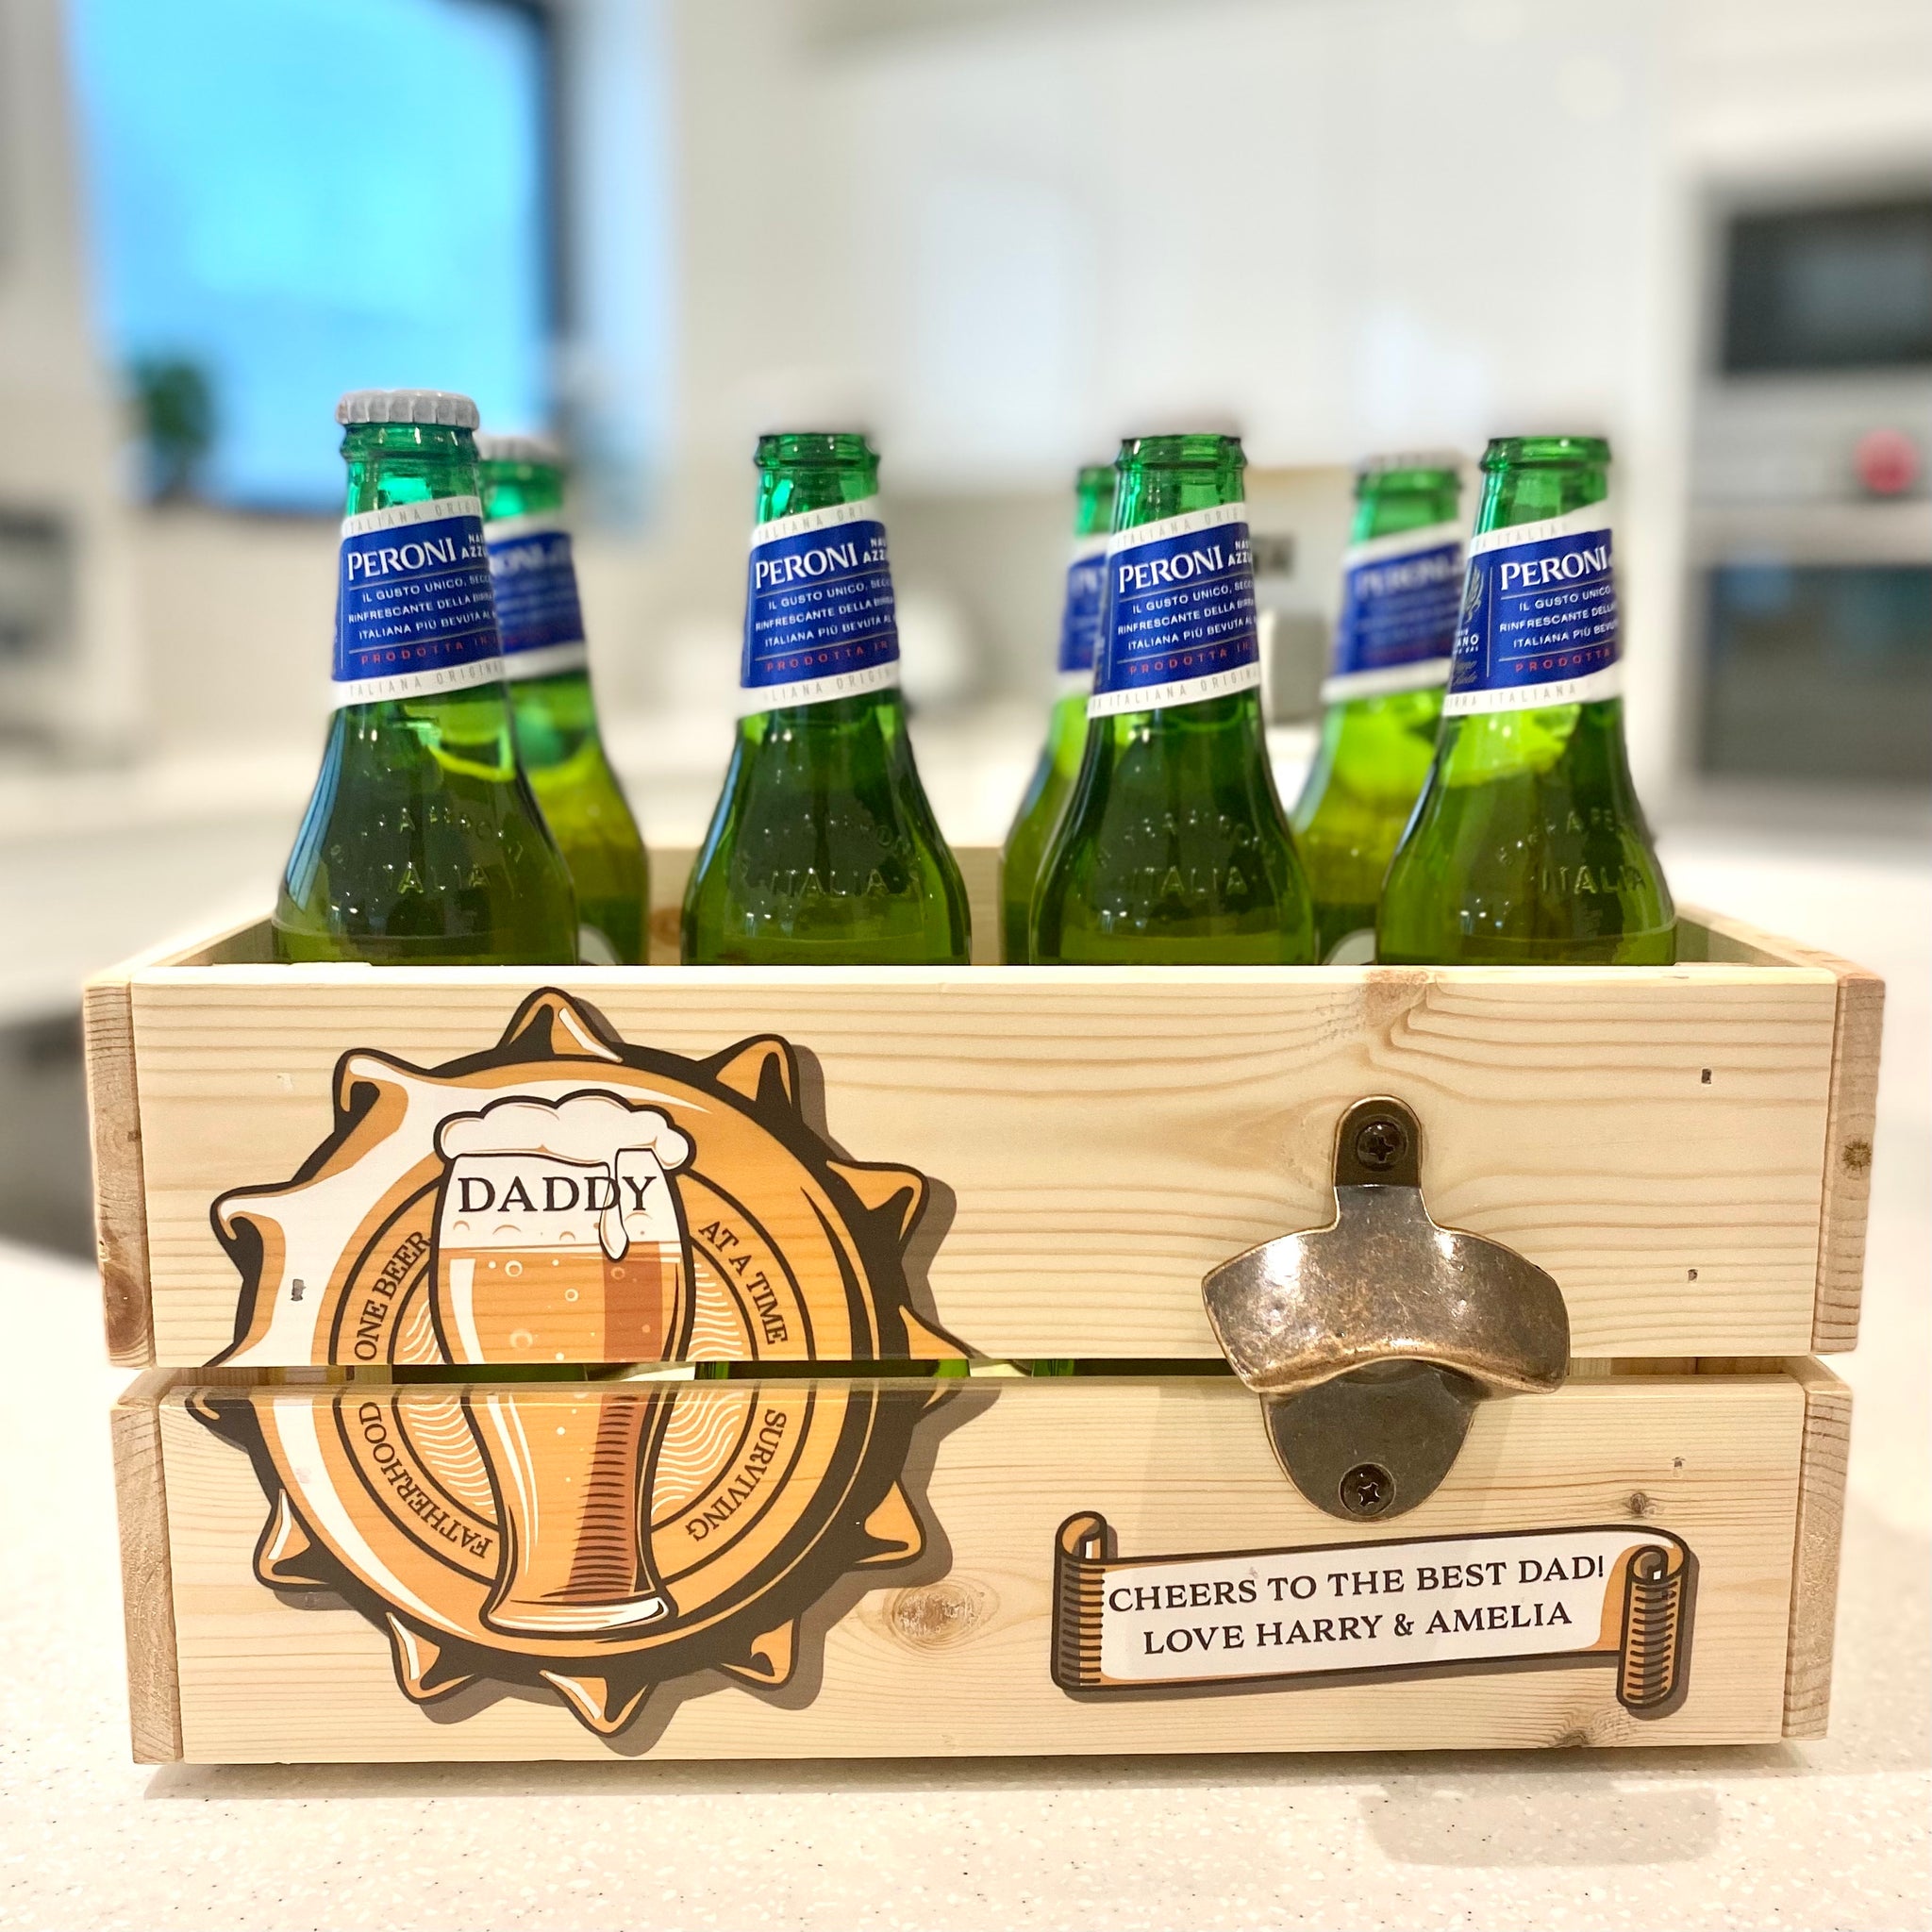 Personalised Father's Day Beer Crate with Bottle Opener – La de da